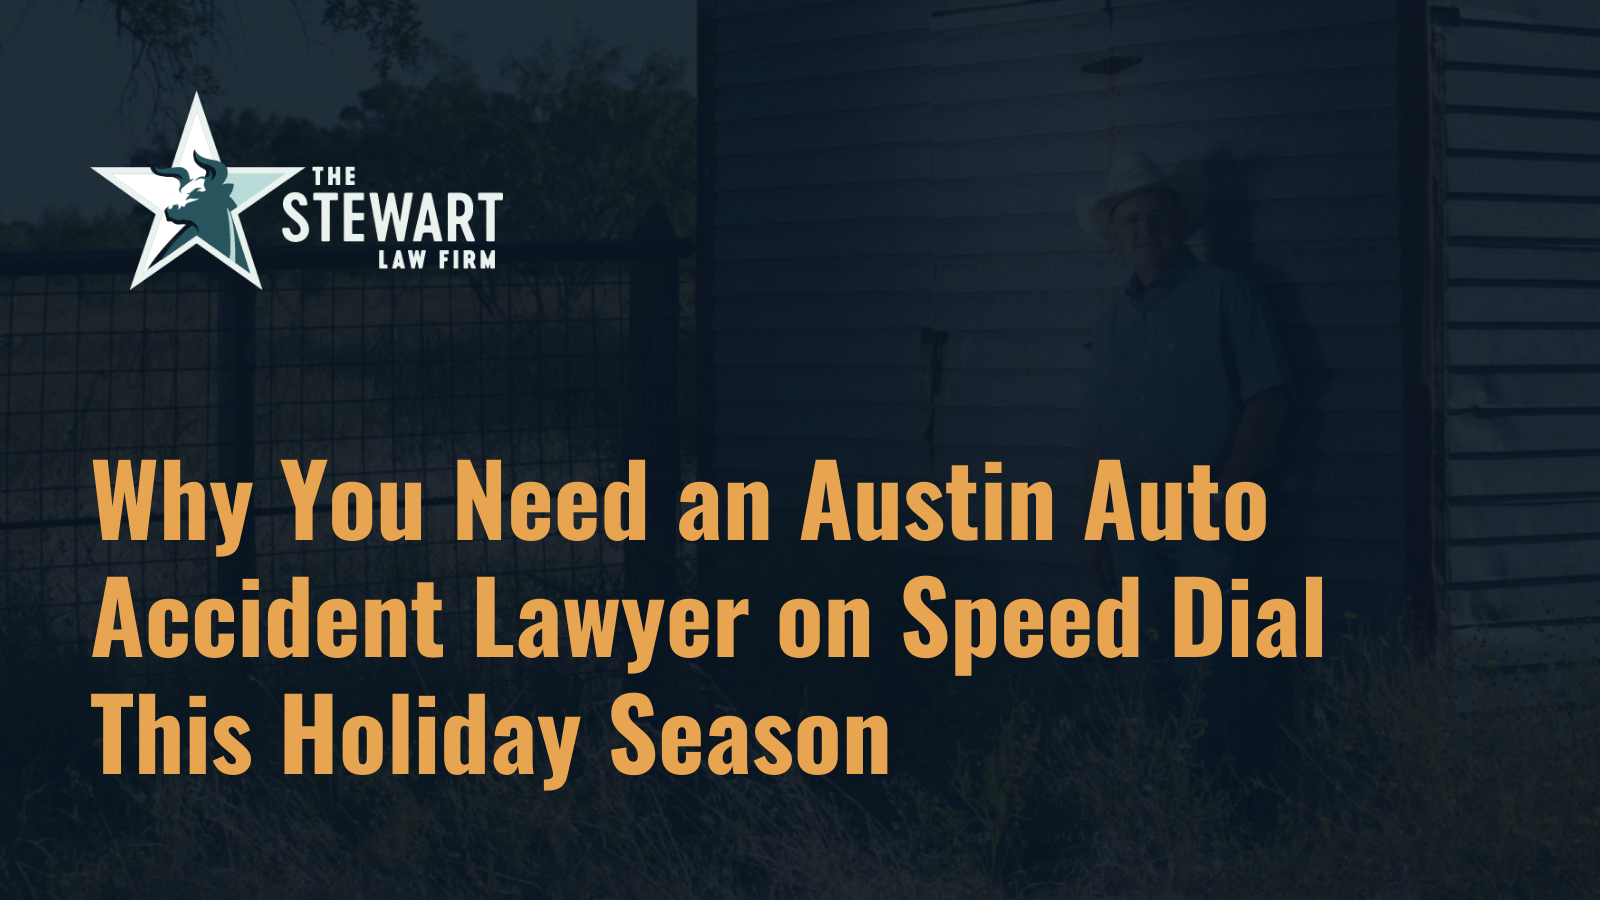 Why You Need an Austin Auto Accident Lawyer on Speed Dial - the stewart law firm - austin texas personal injury lawyer